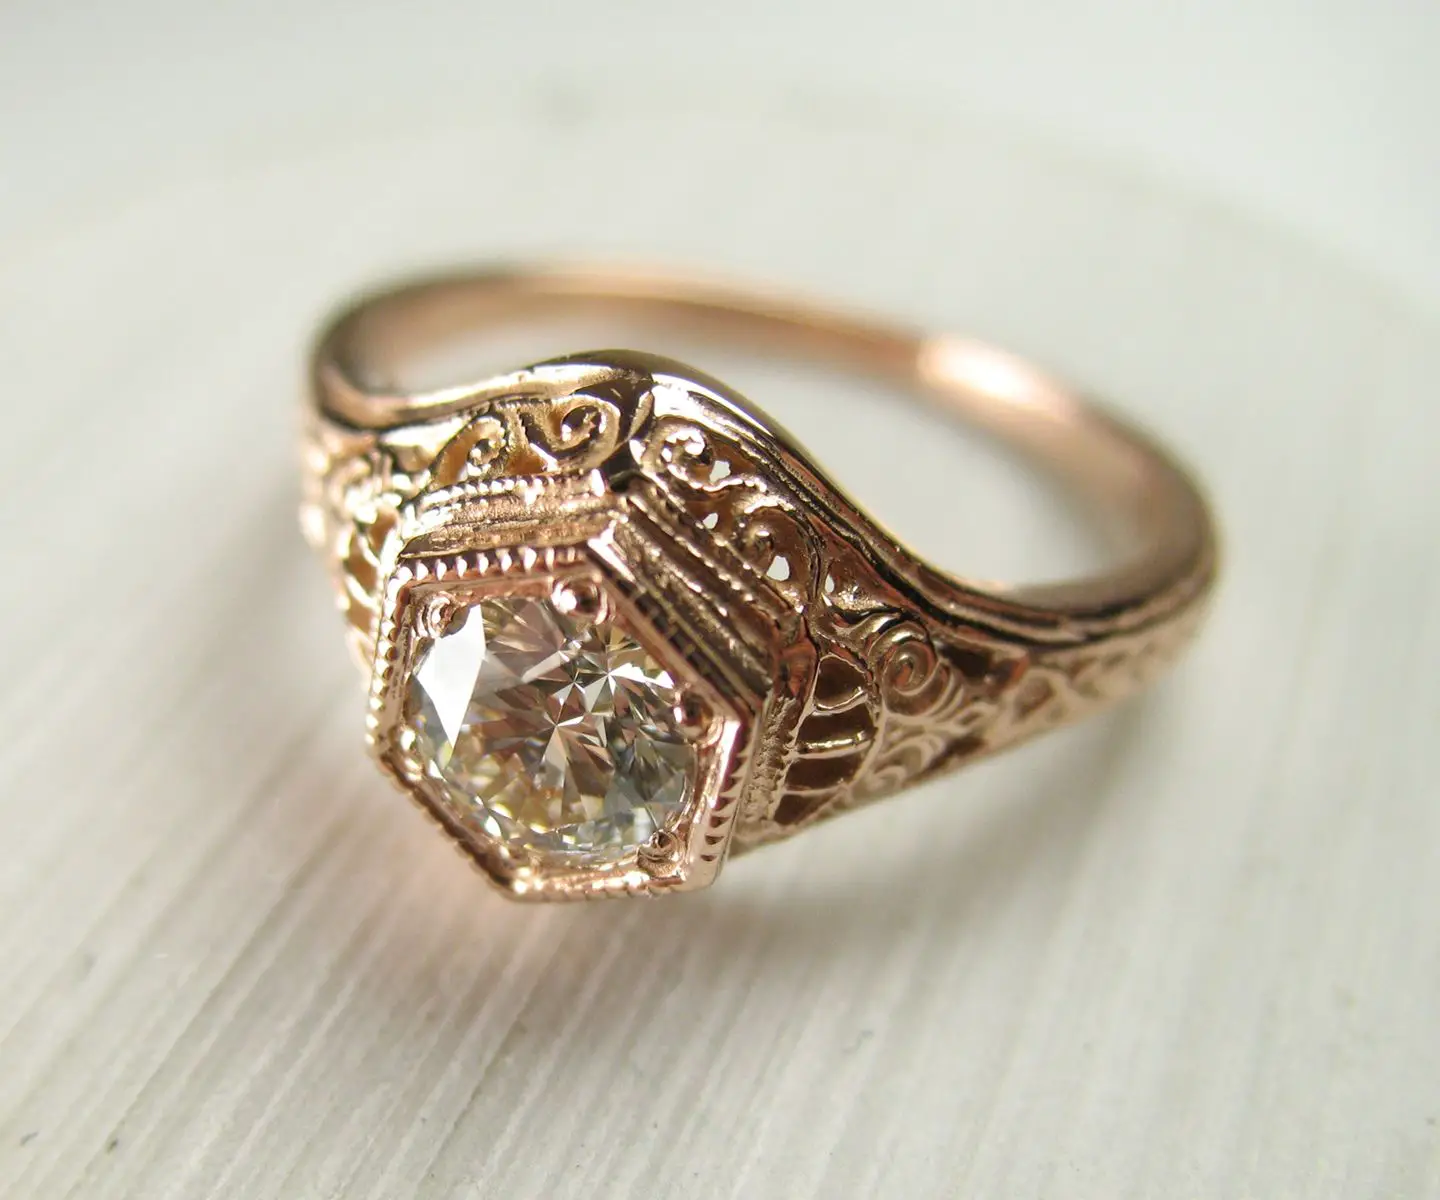 Buy a Hand Crafted Filigree Antique Vintage Engagement Diamond Ring ...